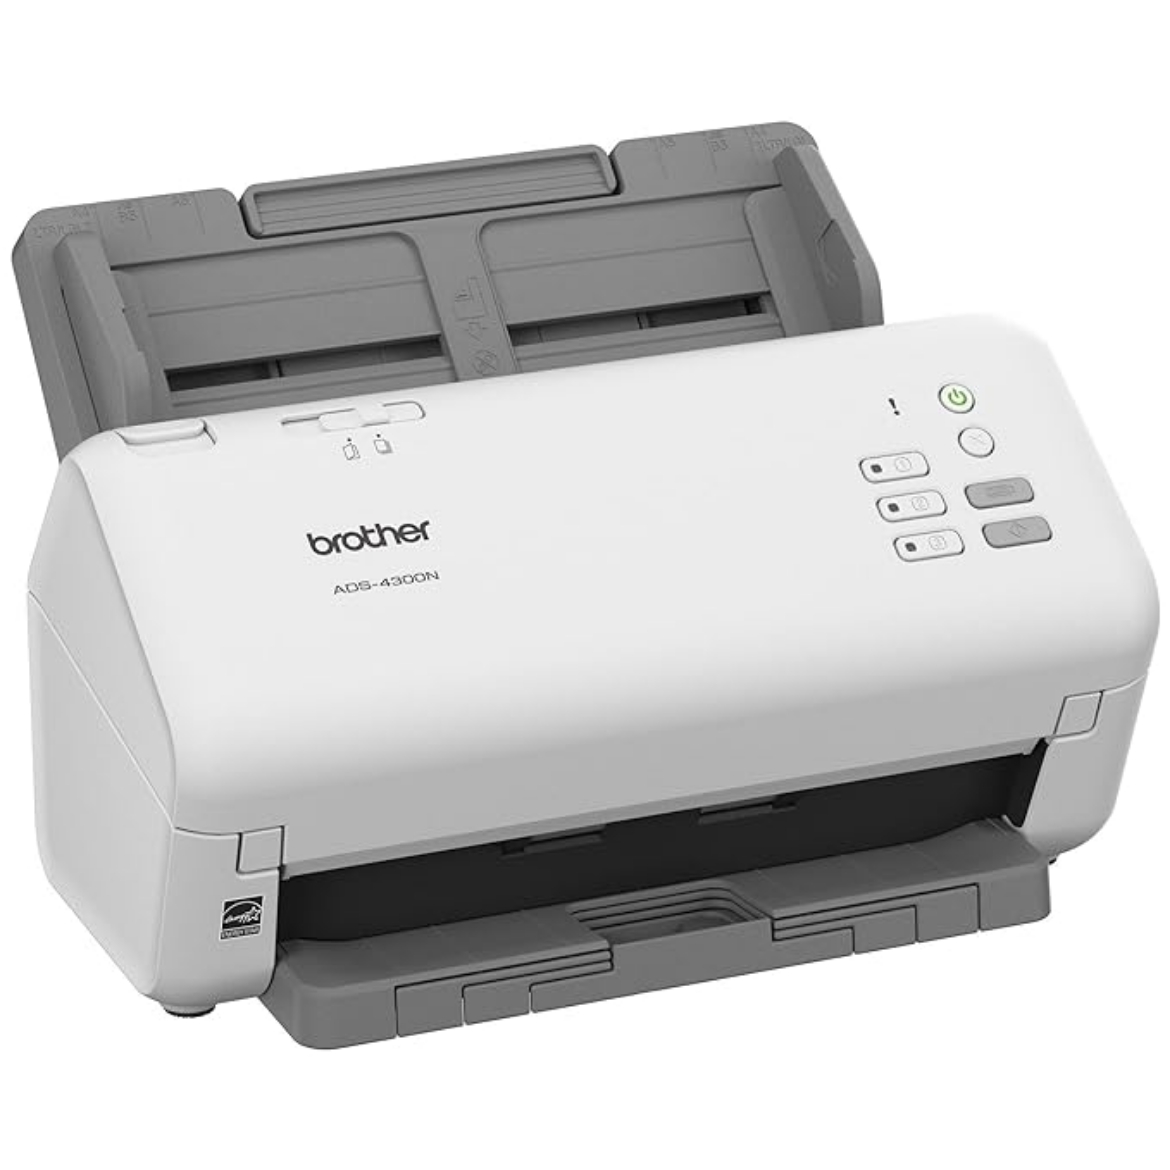 Picture of Brother Network Scanner - ADS-4300N